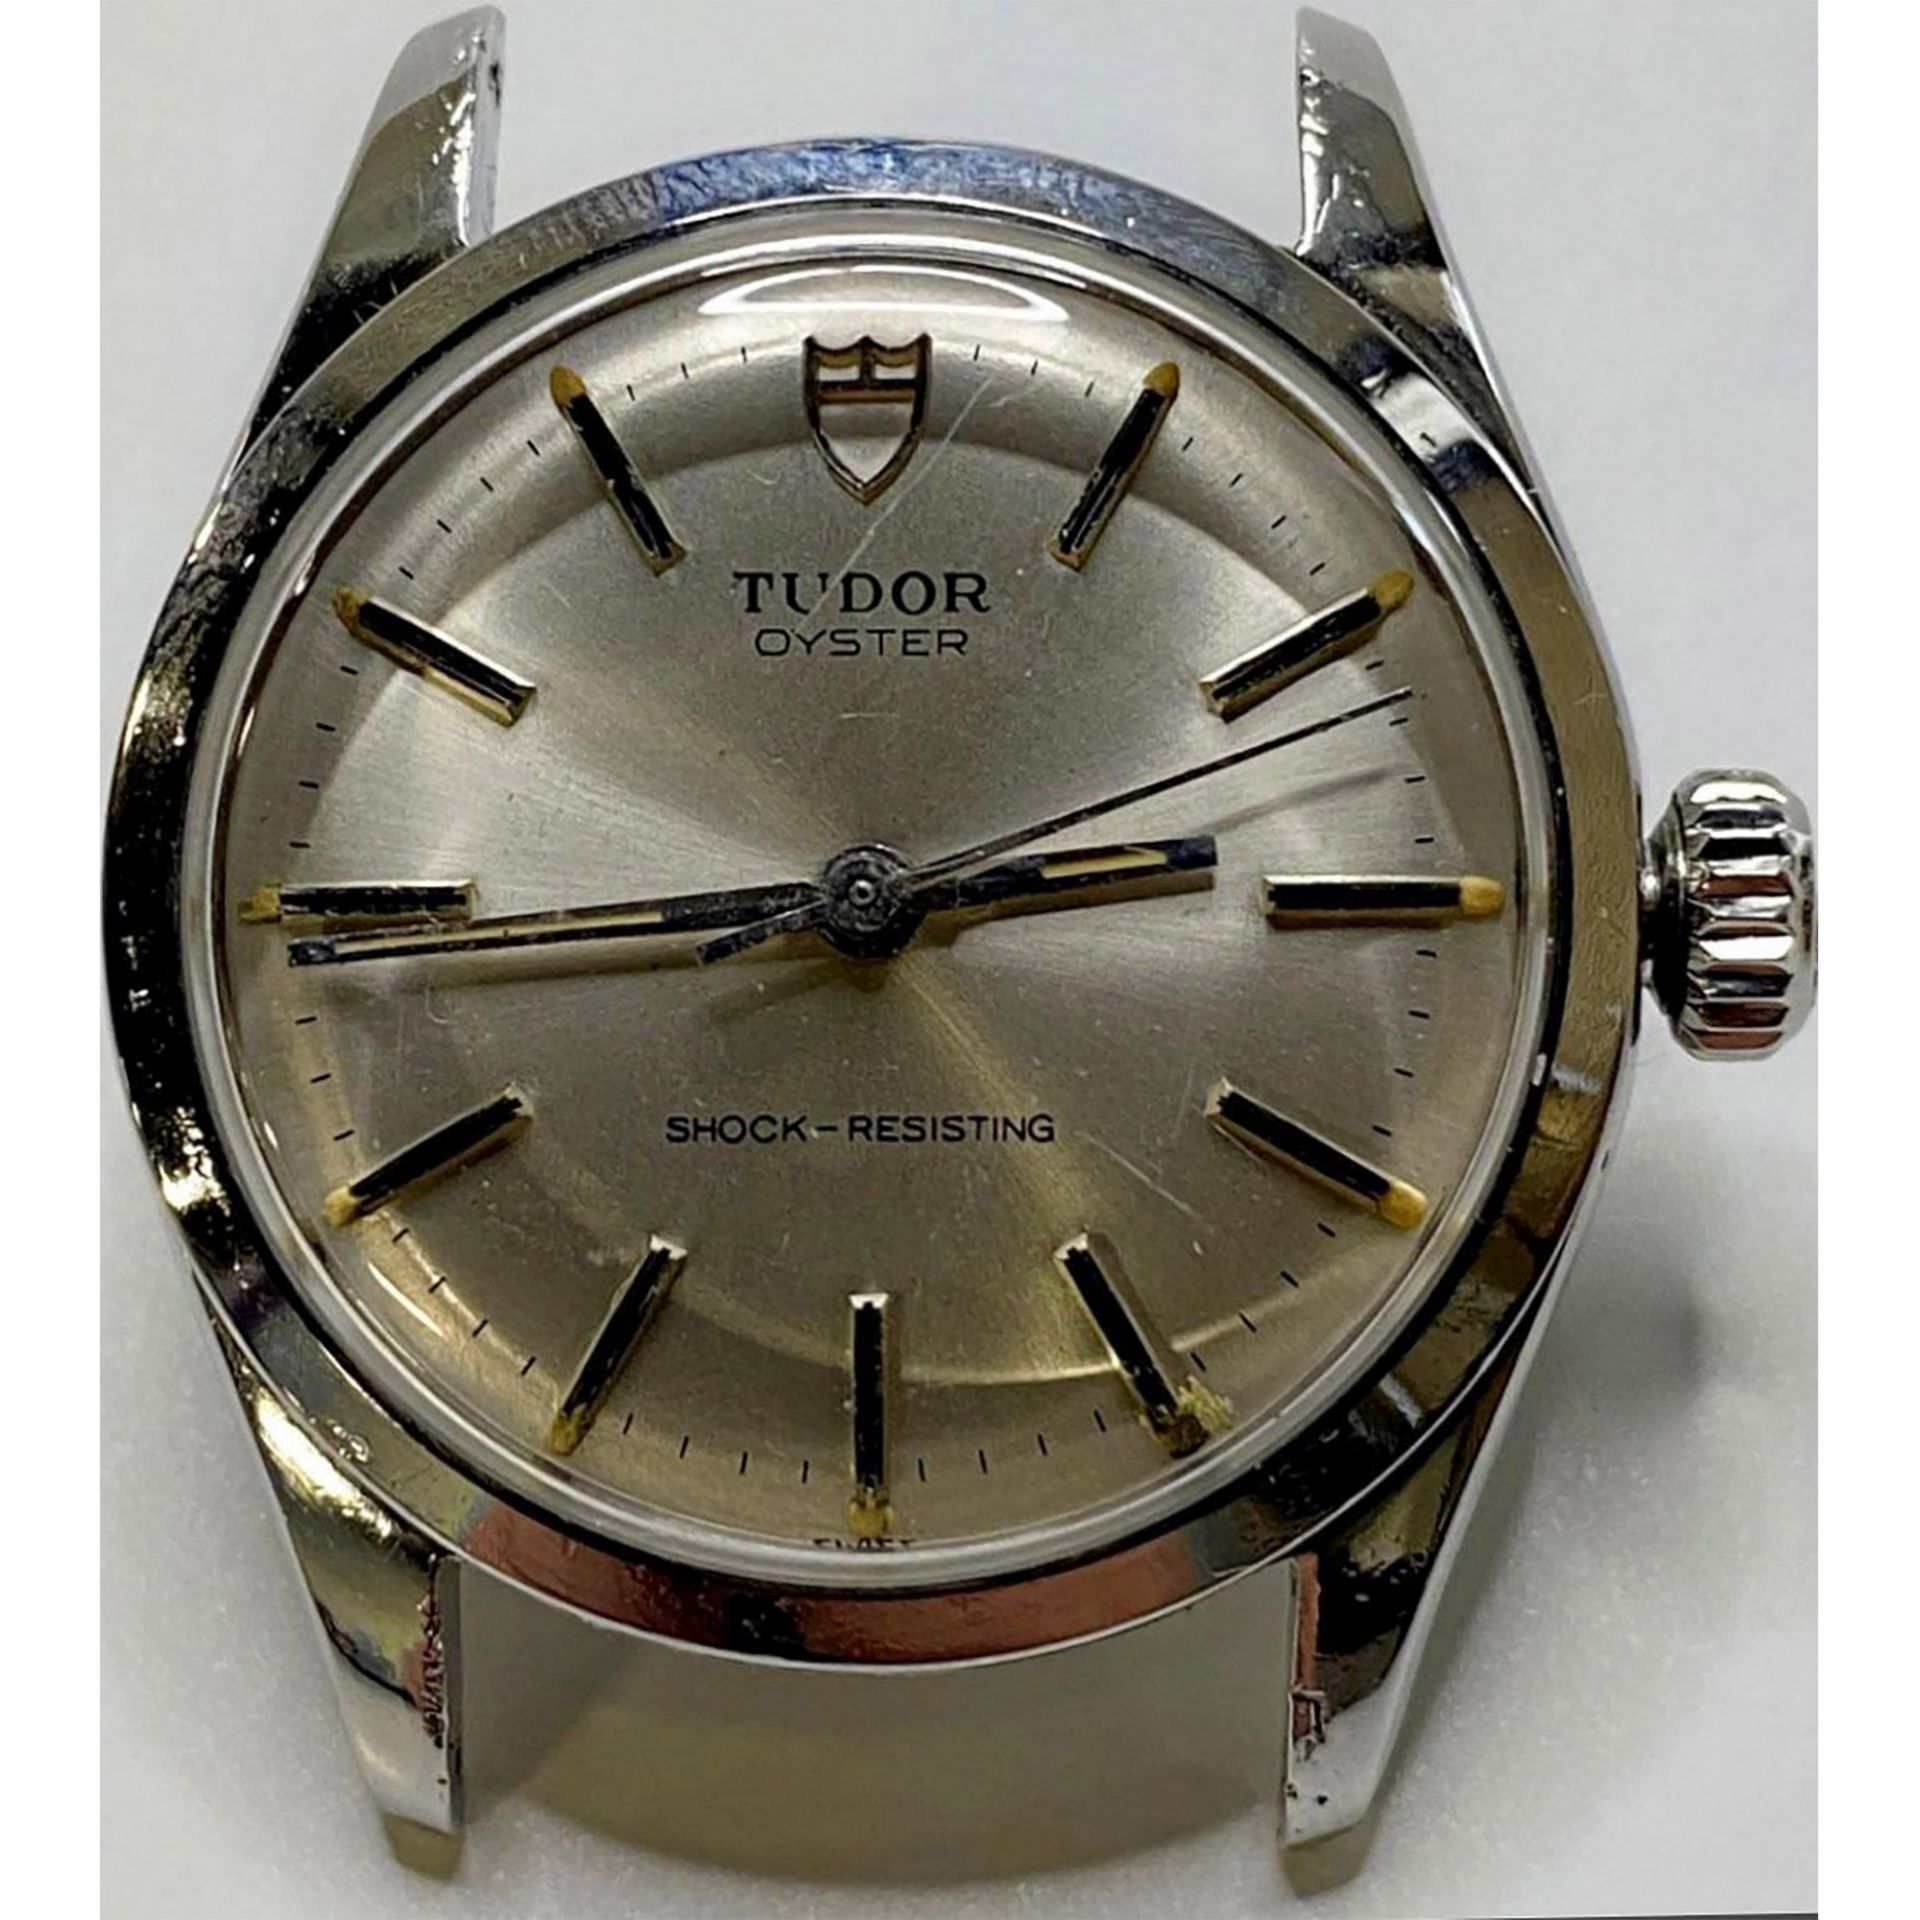 Vintage 1950s Tudor Oyster Manual Watch, 7903 - Image 10 of 10